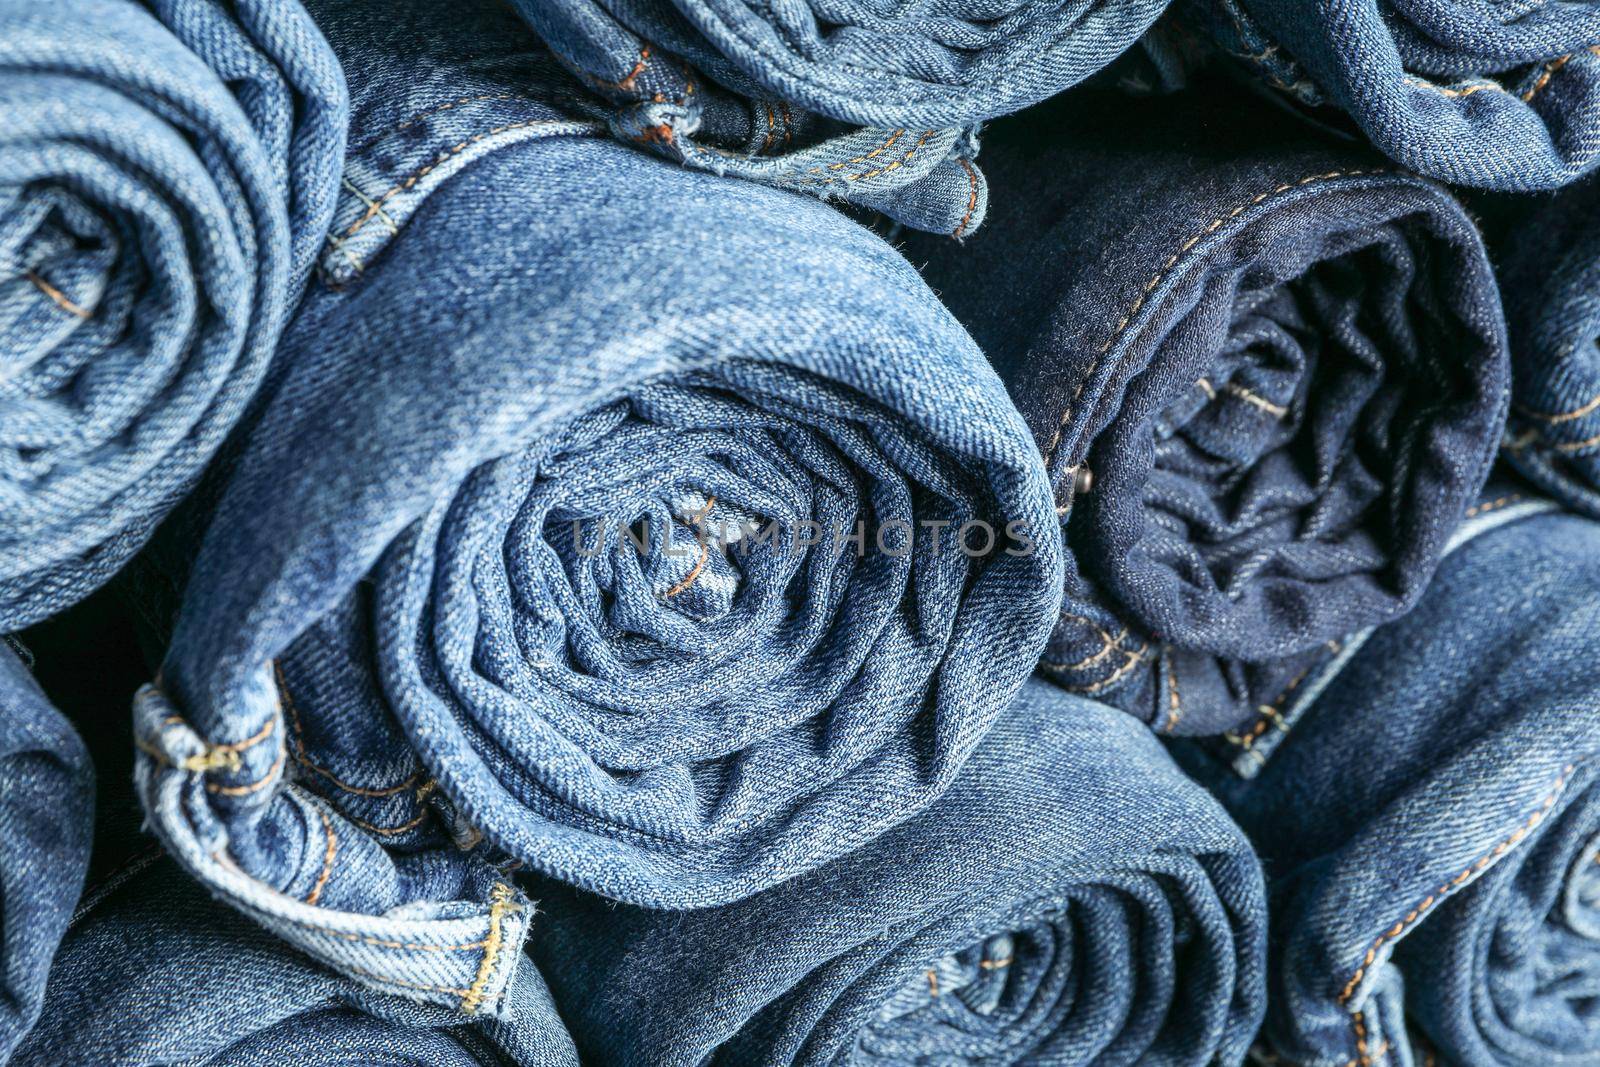 Background of a stack rolled jeans, space for text